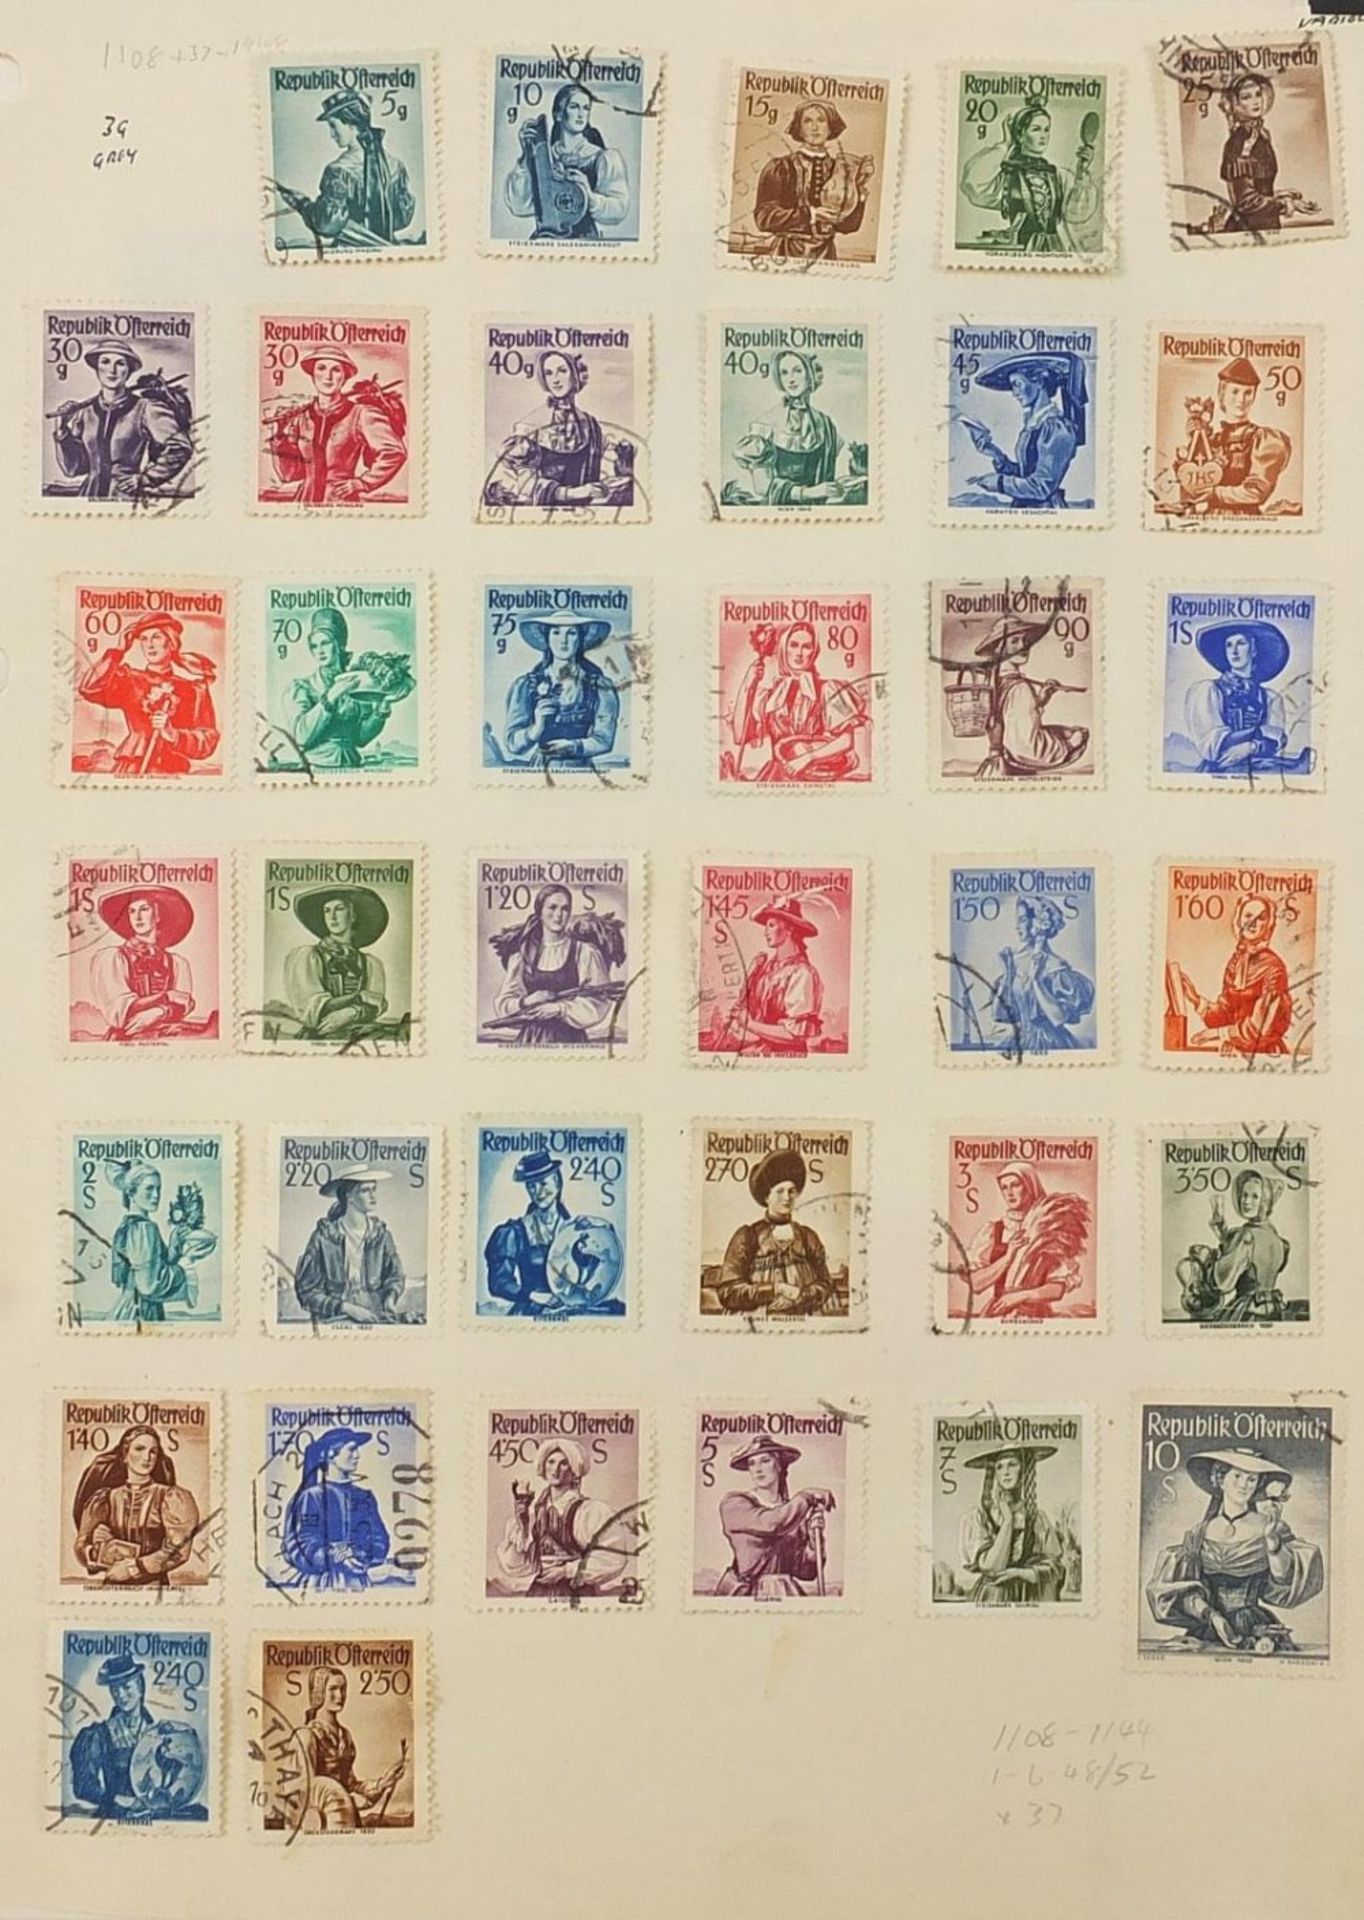 Extensive collection of antique and later world stamps arranged in albums including Brazil, - Image 47 of 52